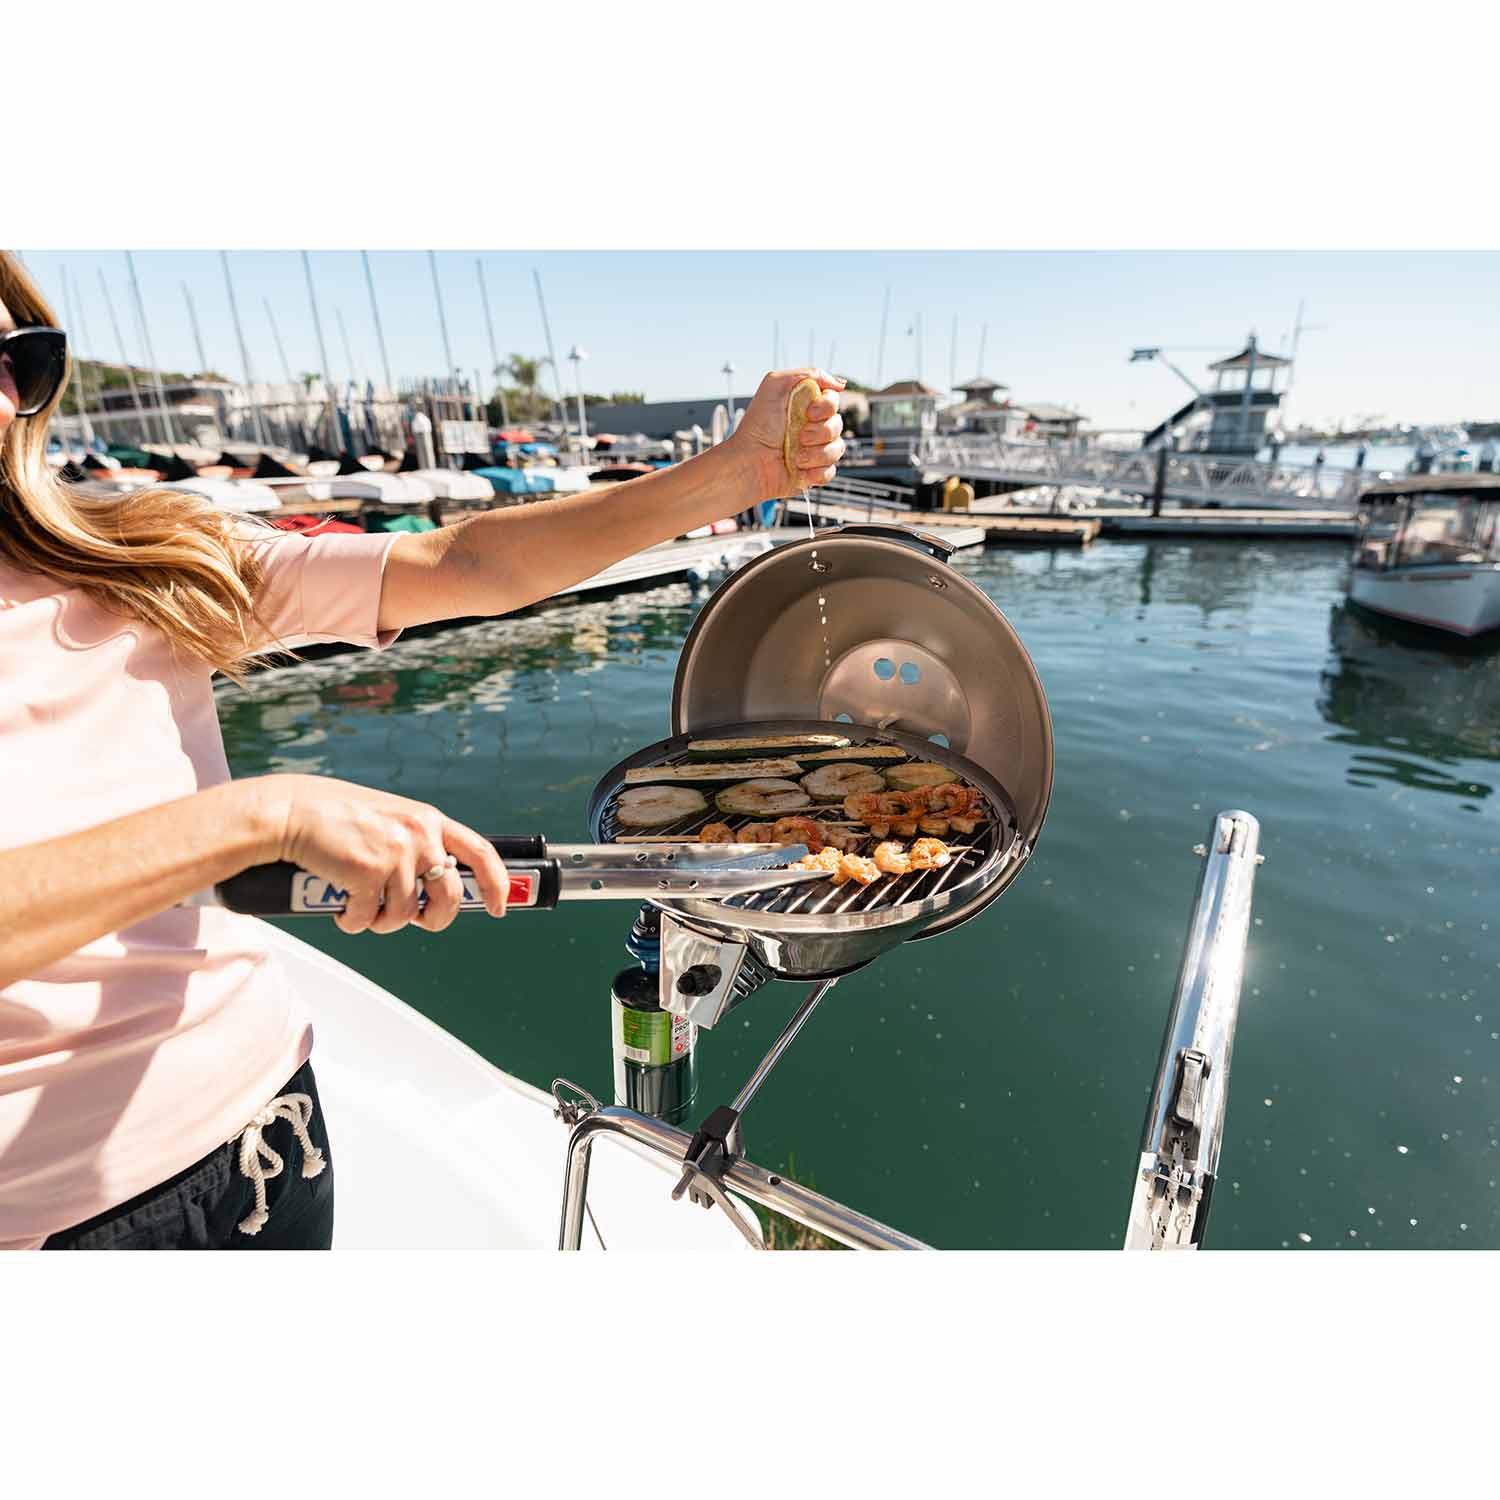 SALE／82%OFF】 ImportSelectionMagma Products, Marine Kettle 3, A10-207-3, Combination  Stove Gas Grill, Propane Portable Oven, Original Size by Magma Products 